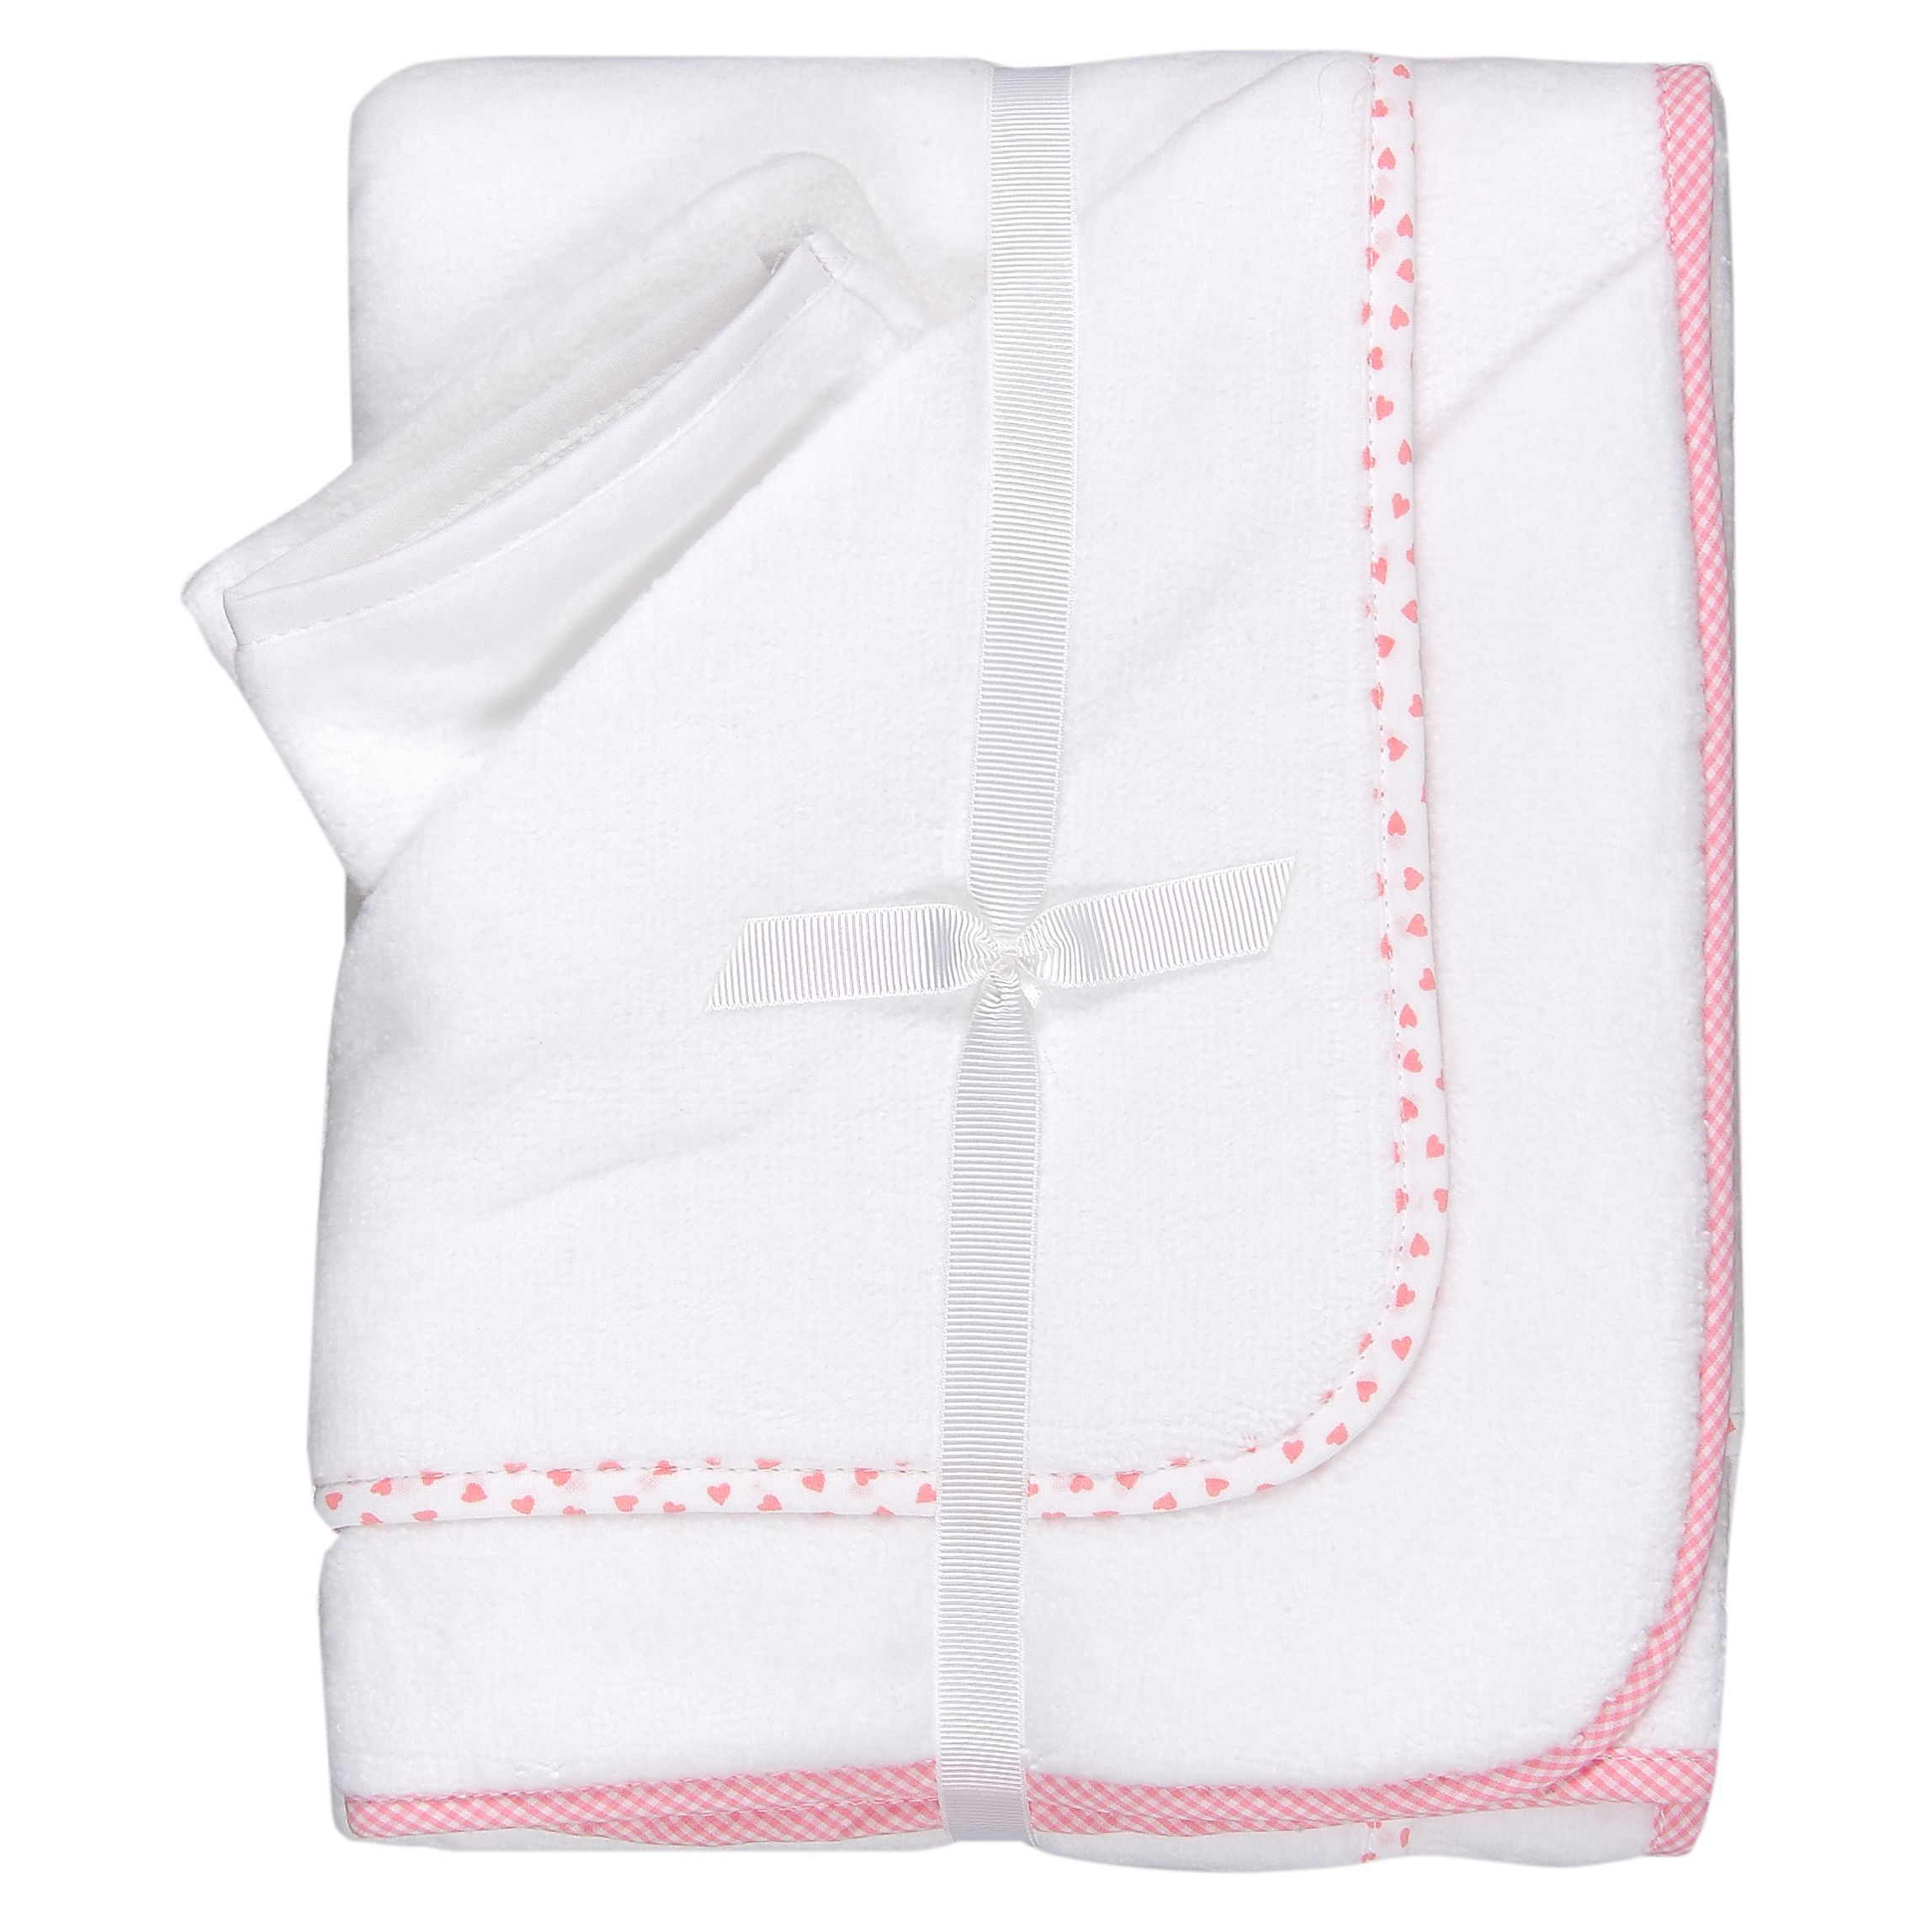 Unbranded Cuddlerobes- Pack of 2- White and Pink